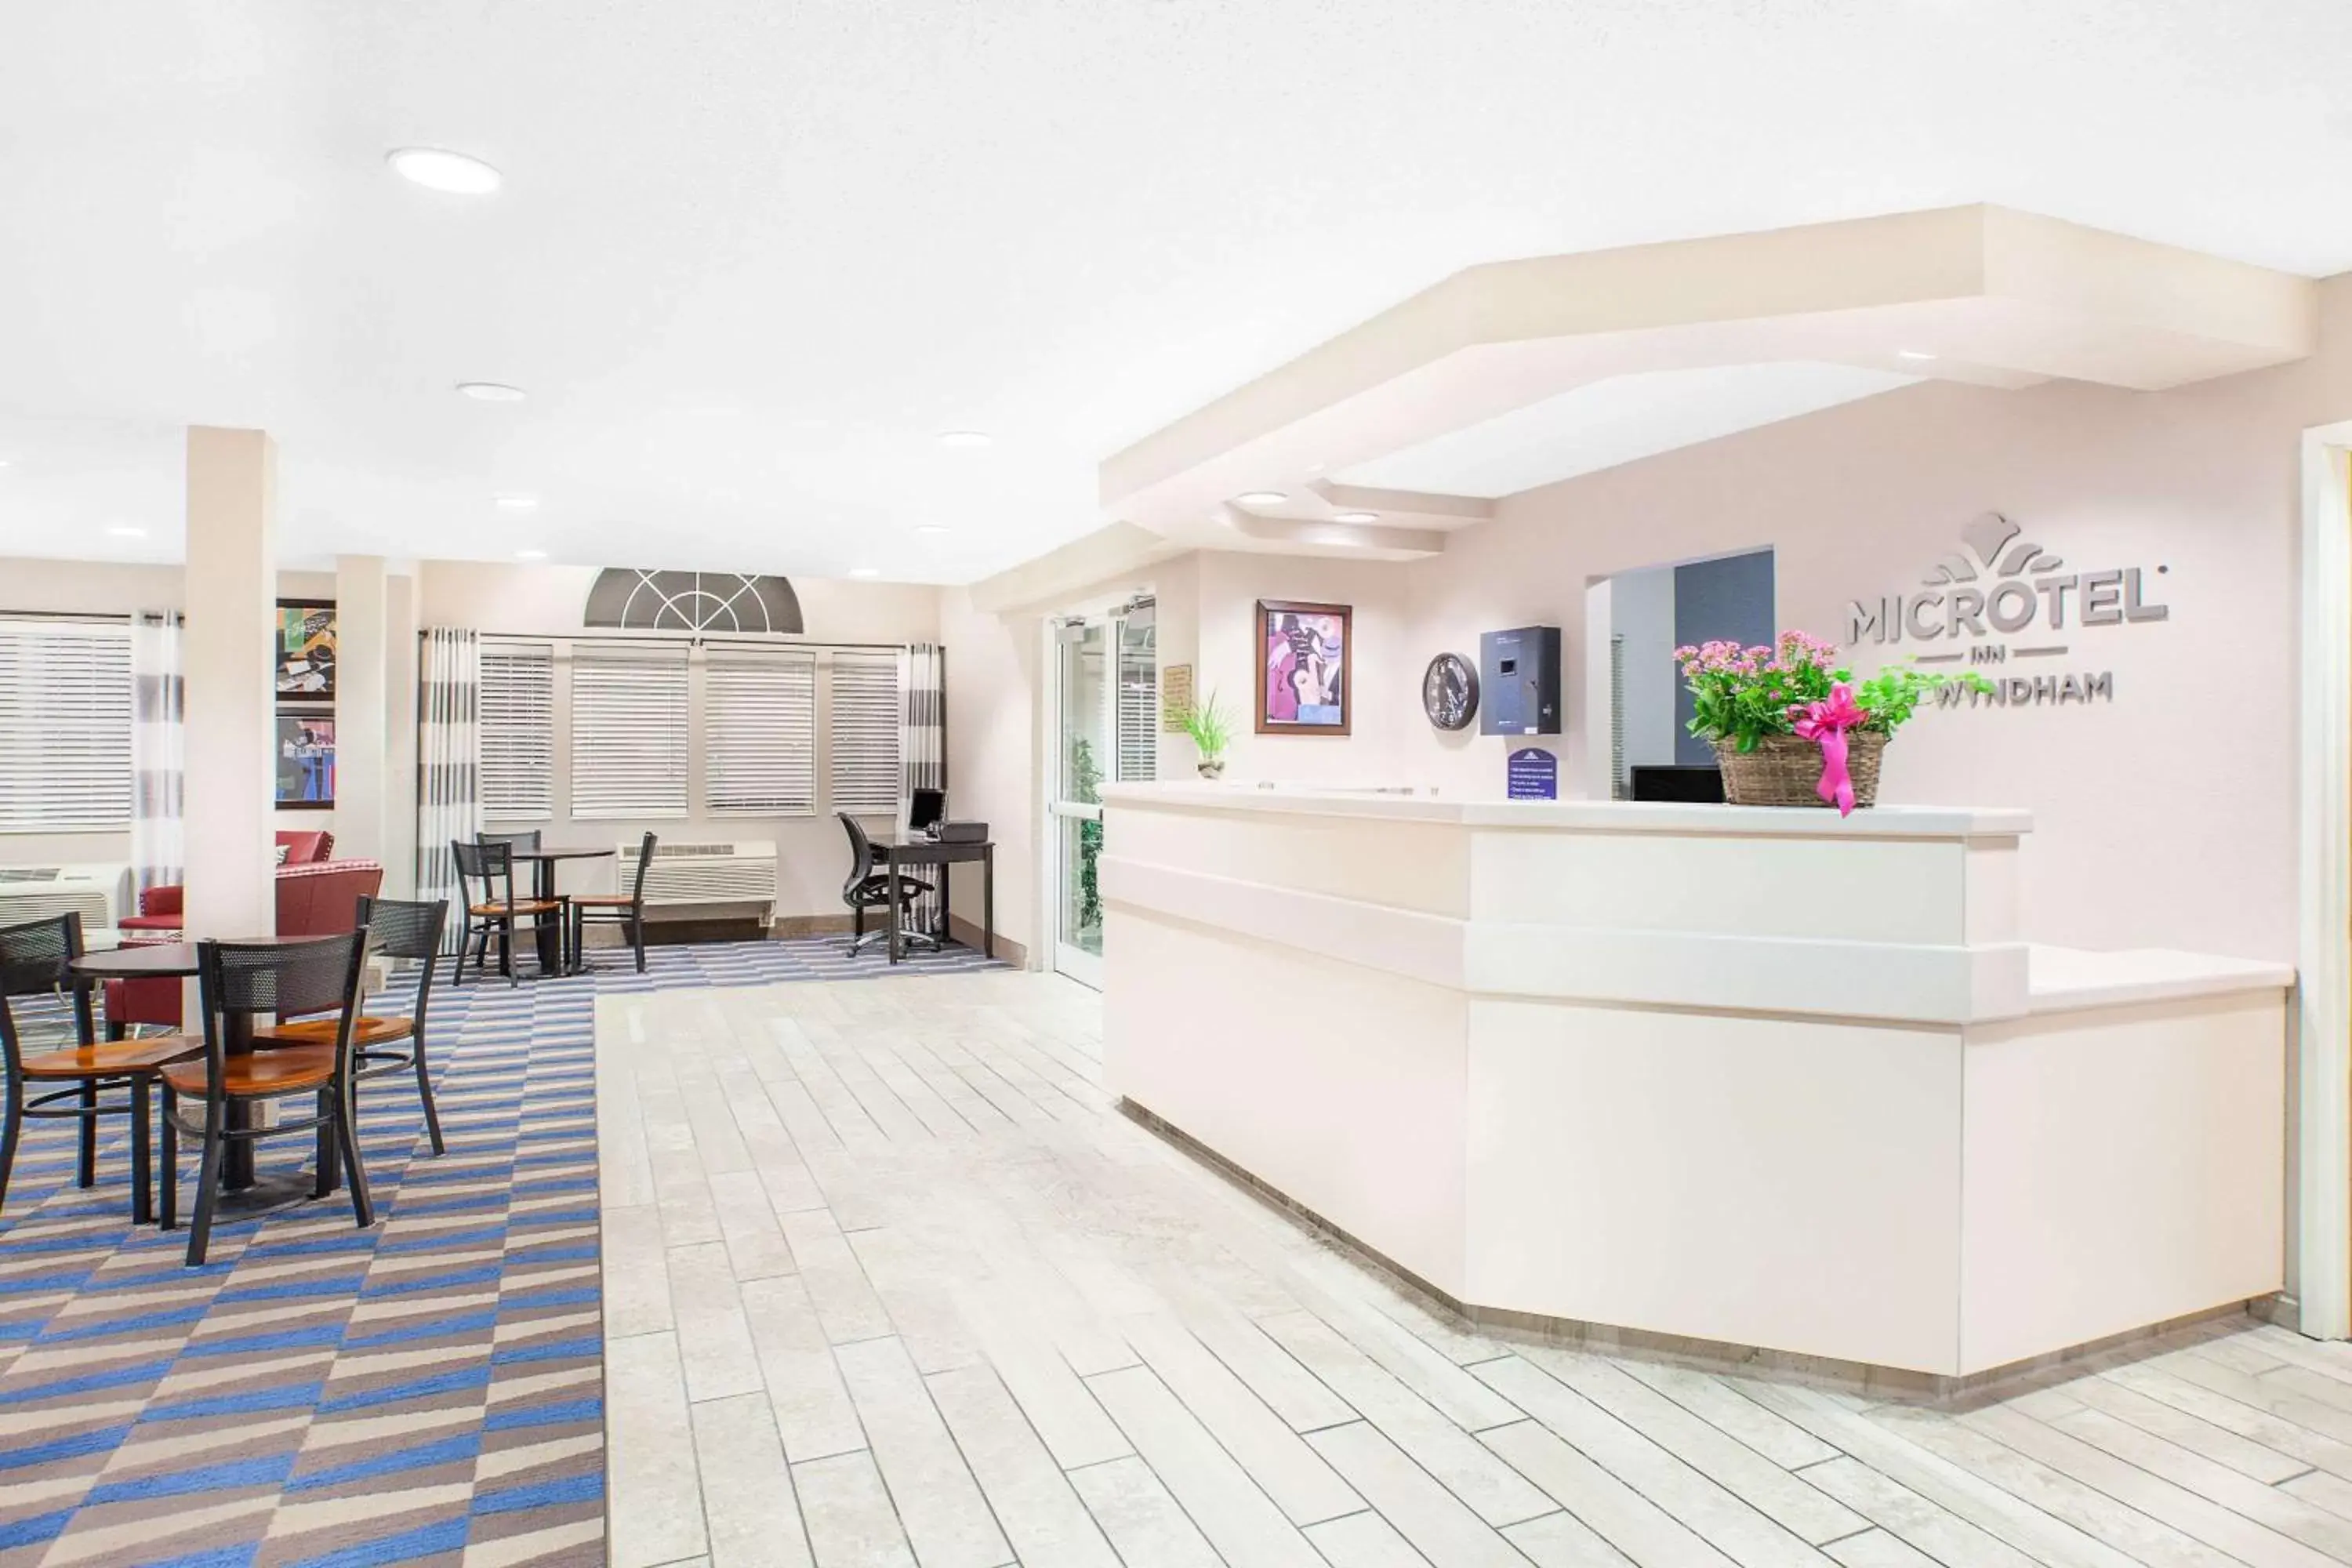 Lobby or reception in Microtel Inn and Suites Clear Lake